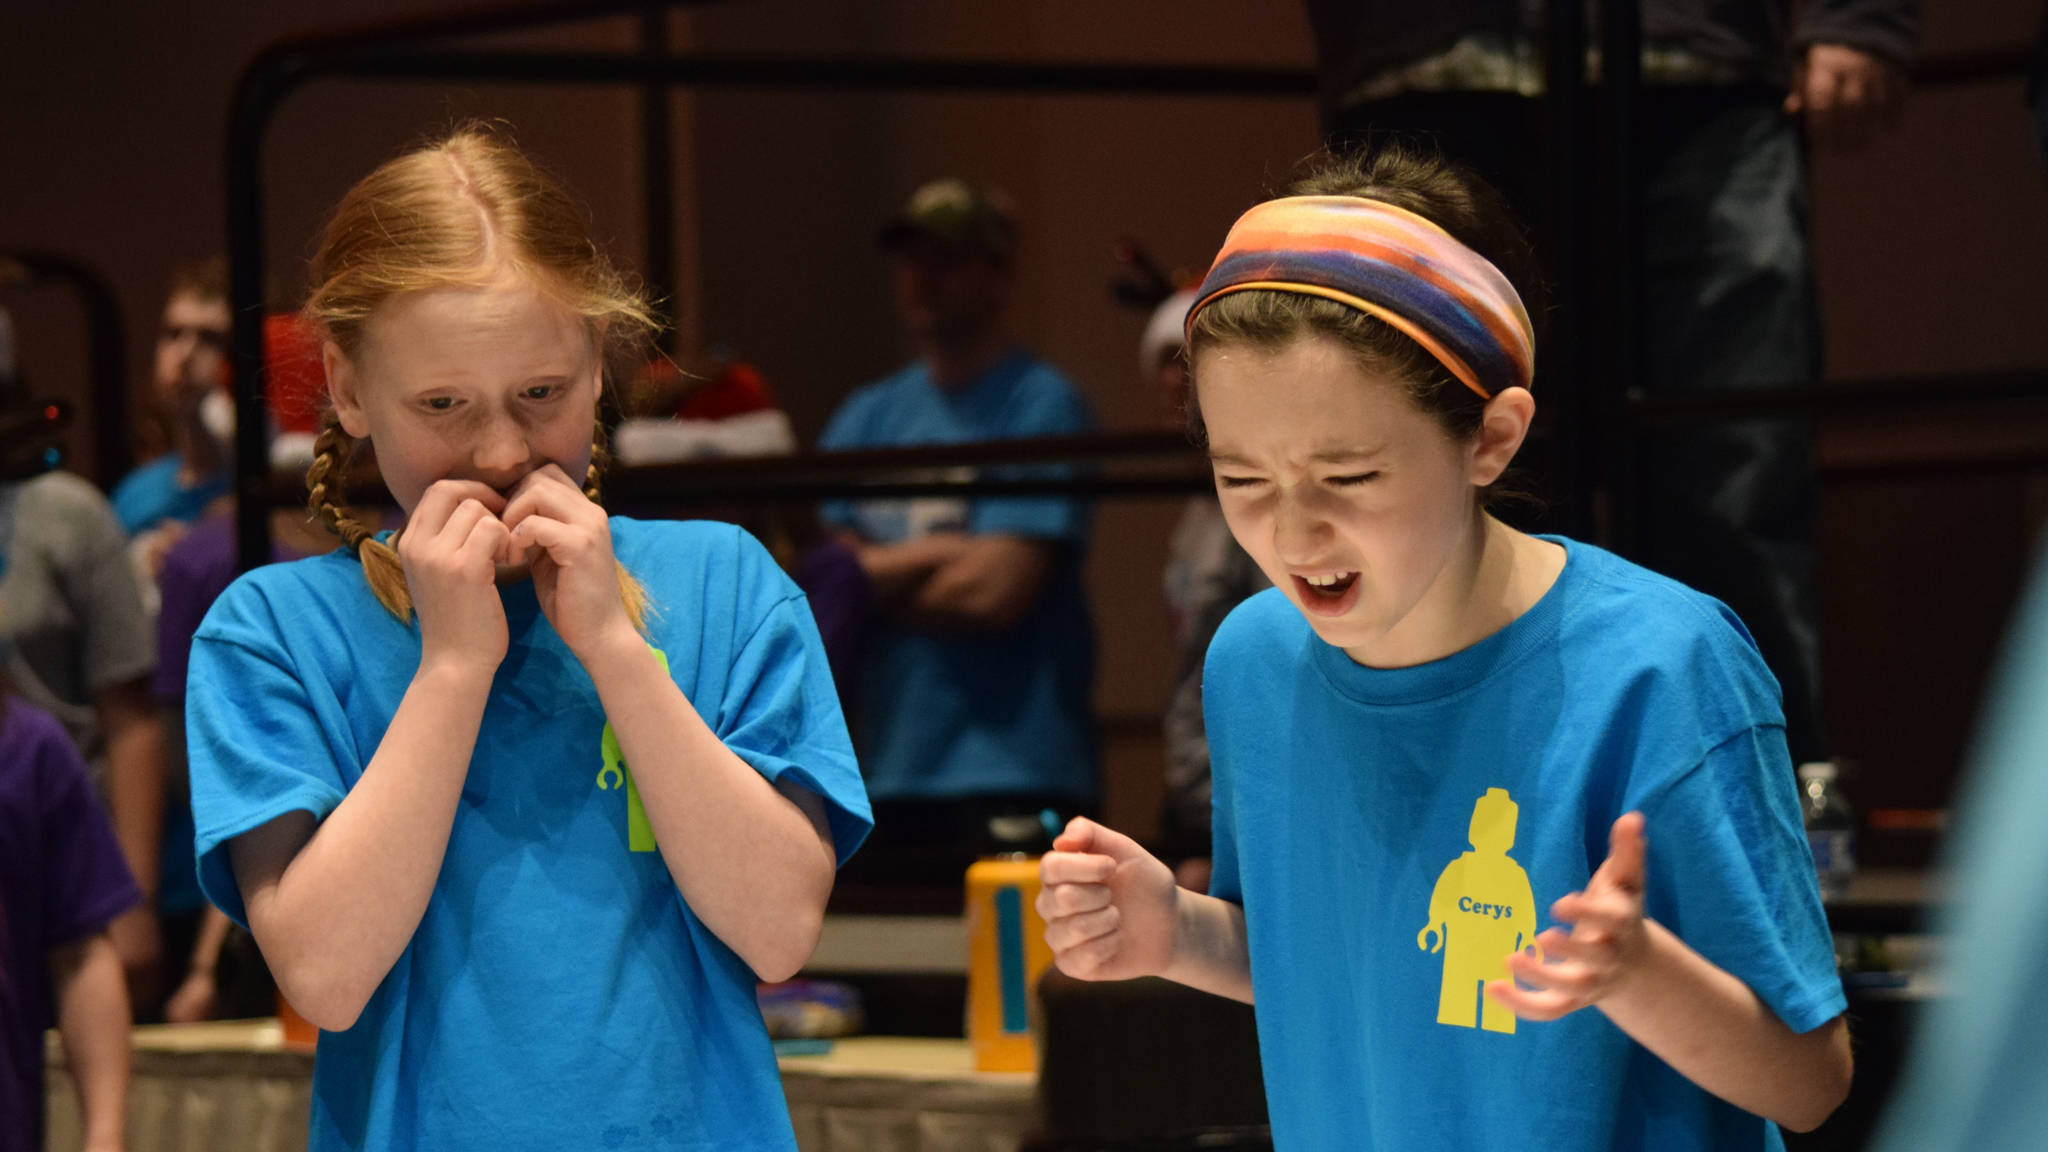 Two competitors in the Juneau Robot Jamboree react to an uncooperative robot at Centennial Hall Convention Center on Saturday. (Kevin Gullufsen | Juneau Empire)